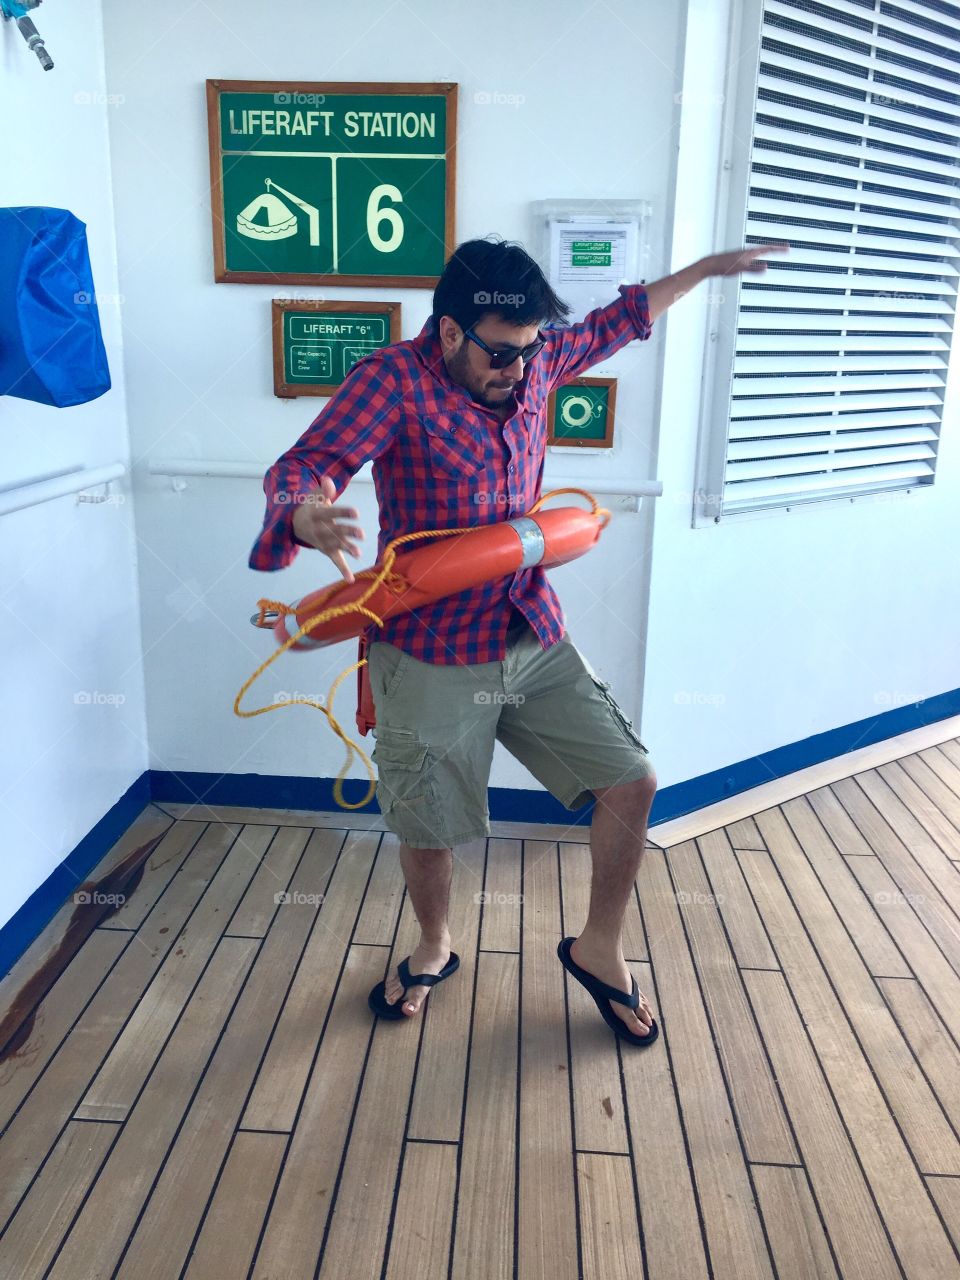 Guy in a gingham red shirt hula hooping with an orange lifesaver floatation device on a cruise ship